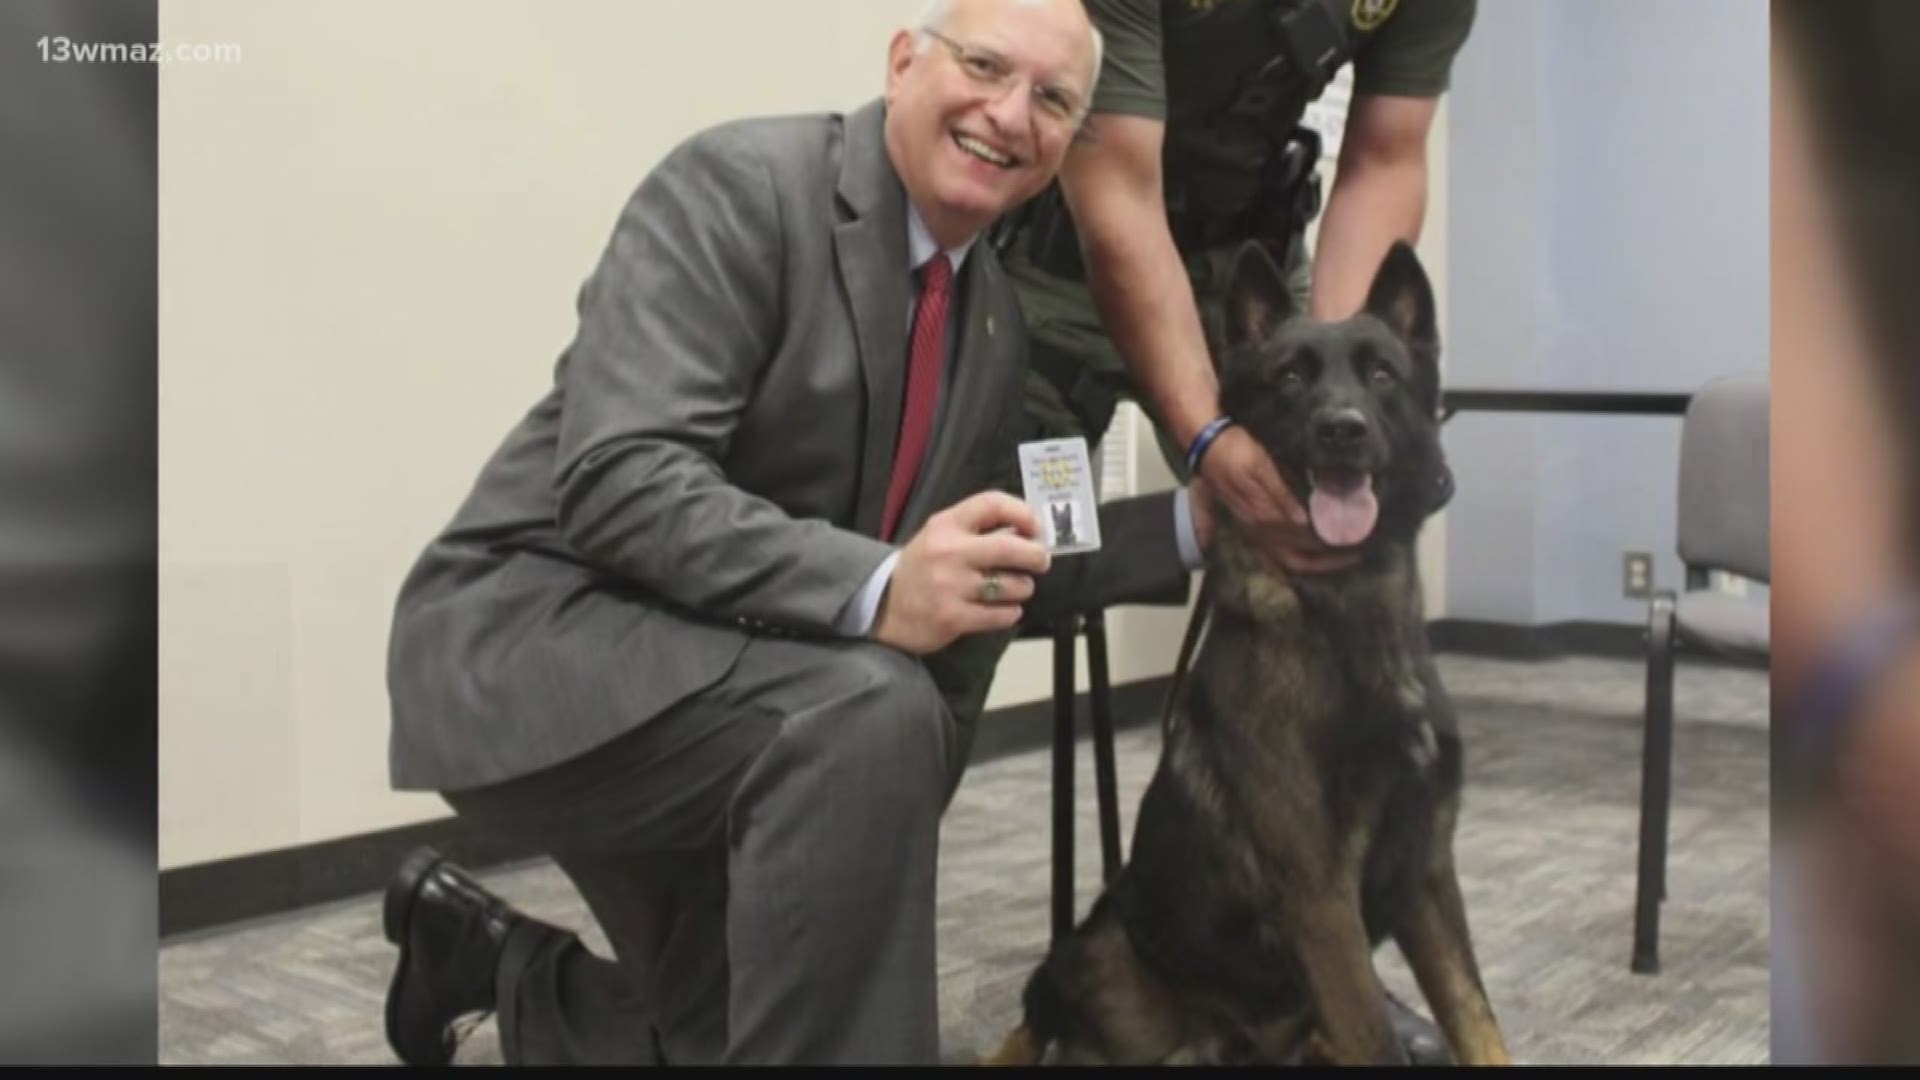 The sheriff's office has two dogs -- Hugo and Athena.  Those dogs have been right under your noses at football games, public events, and airports.